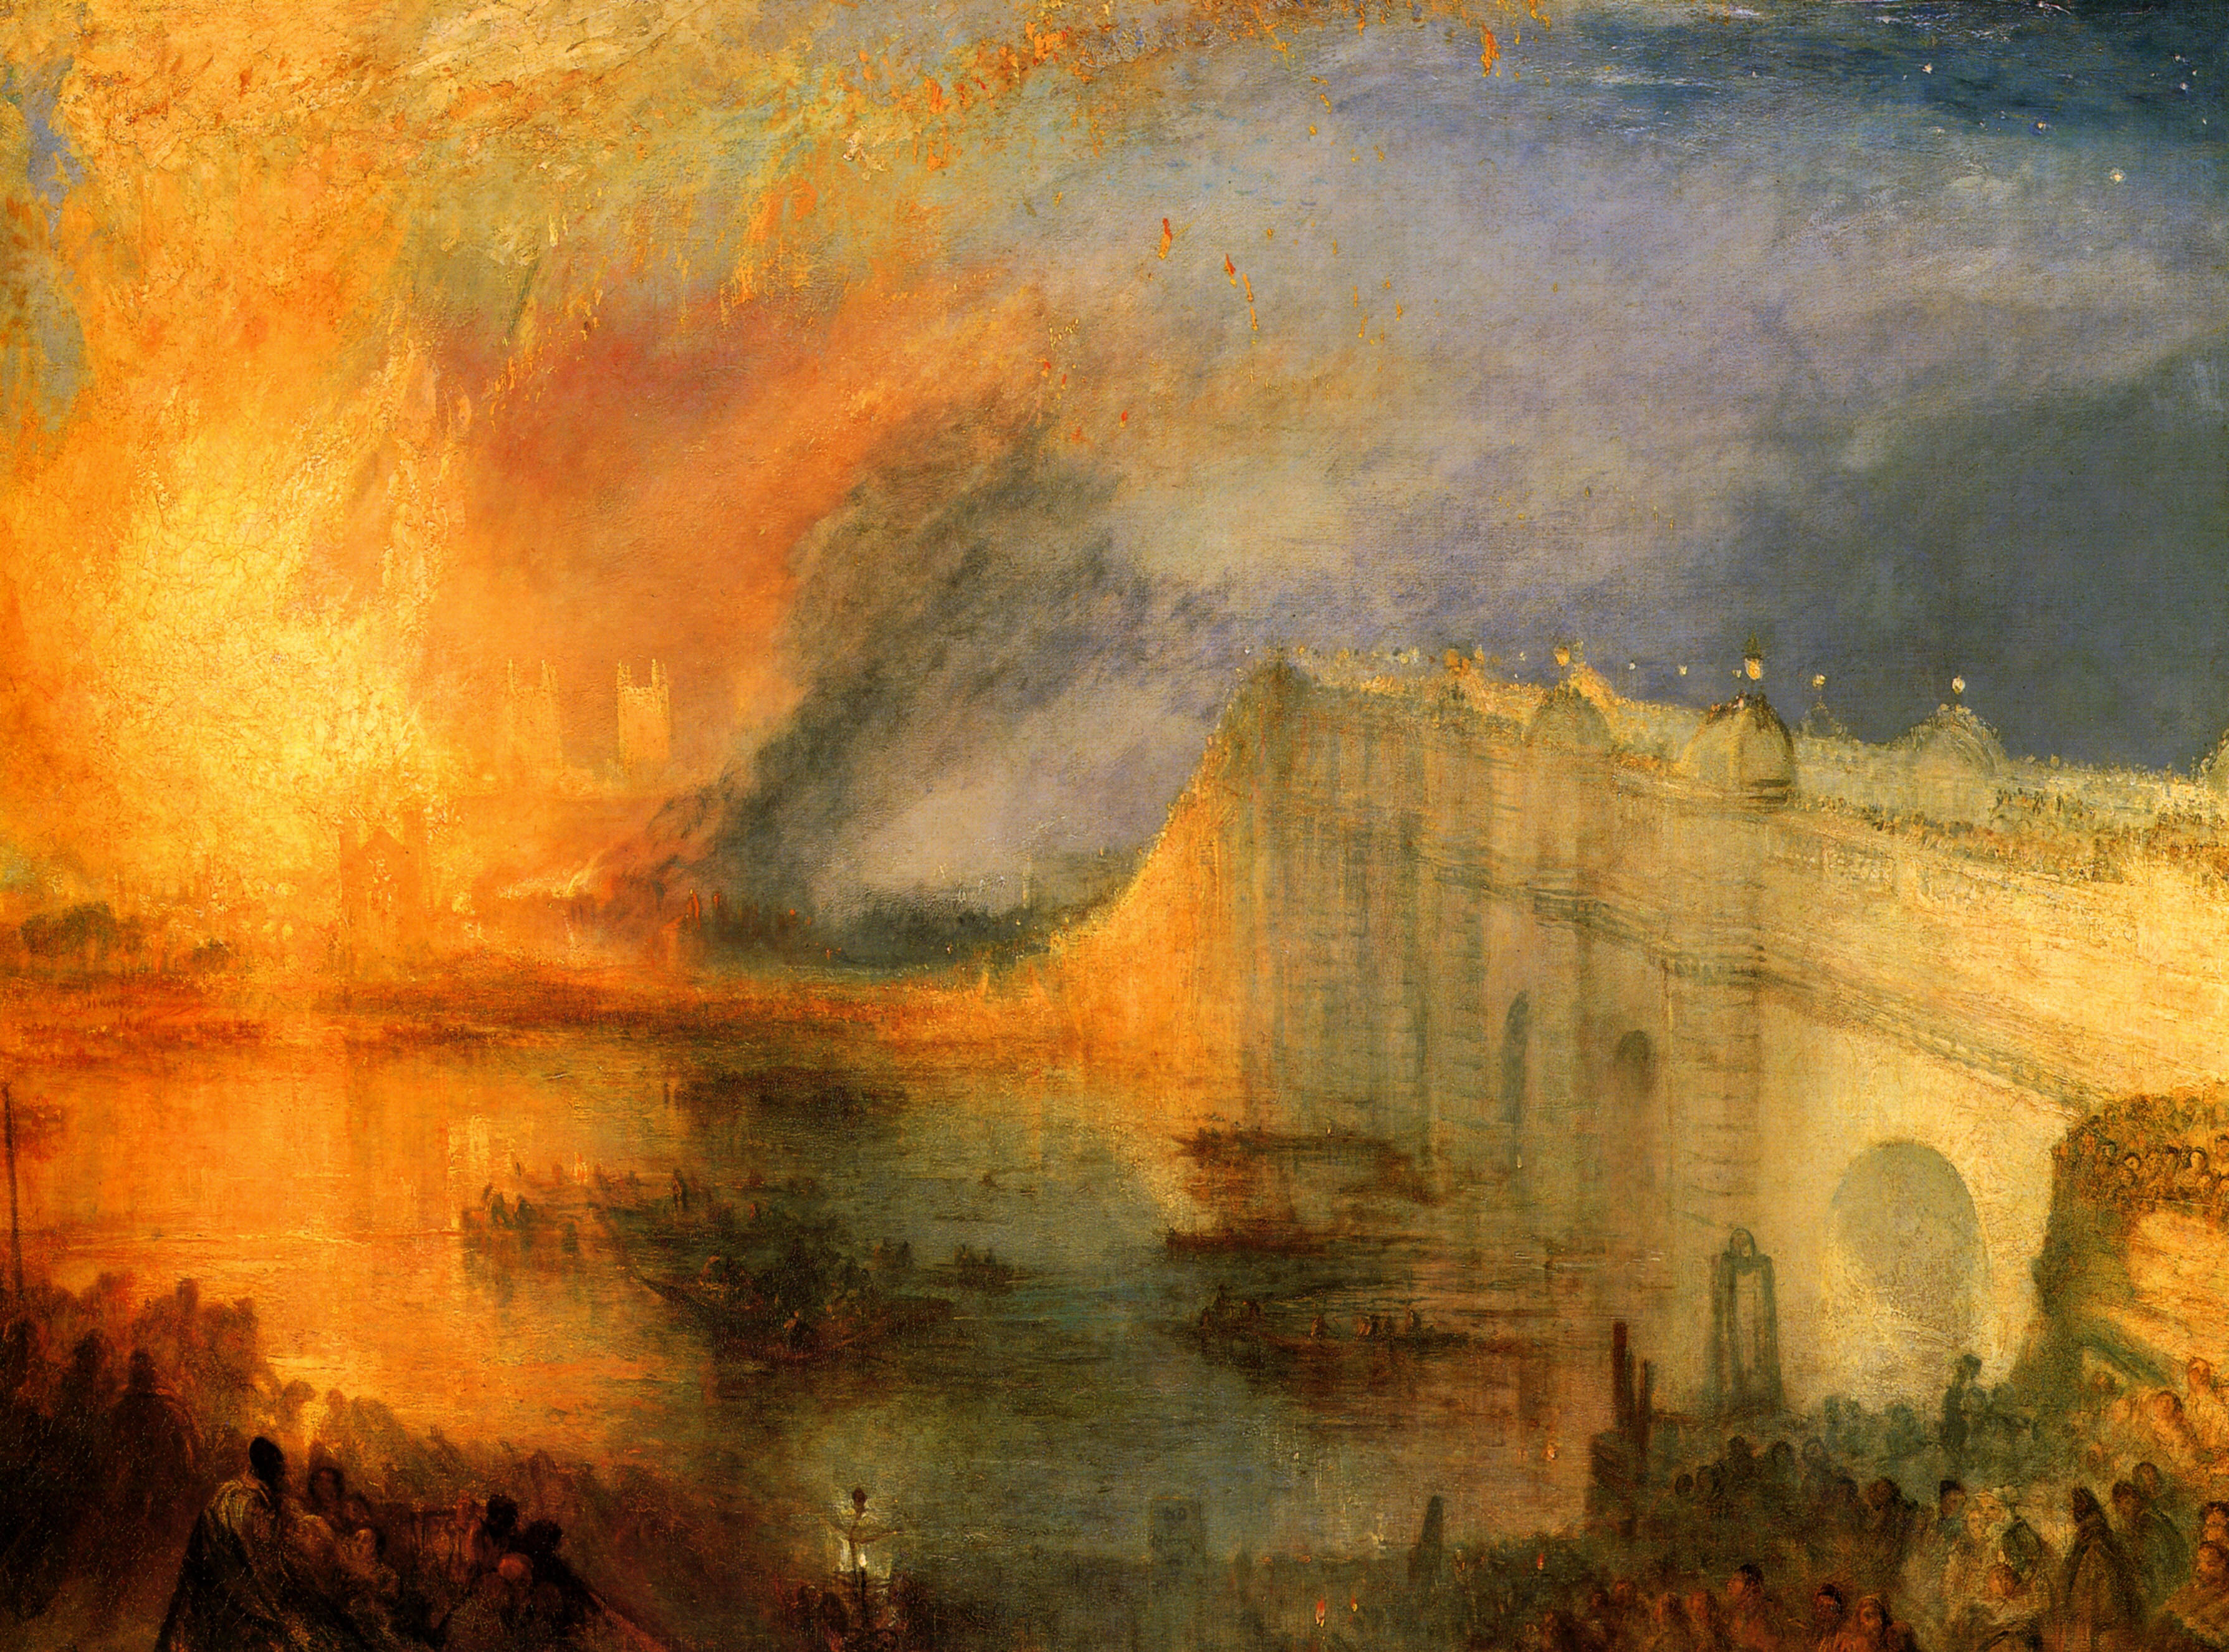 The Burning of the Houses of Parliament (1834).